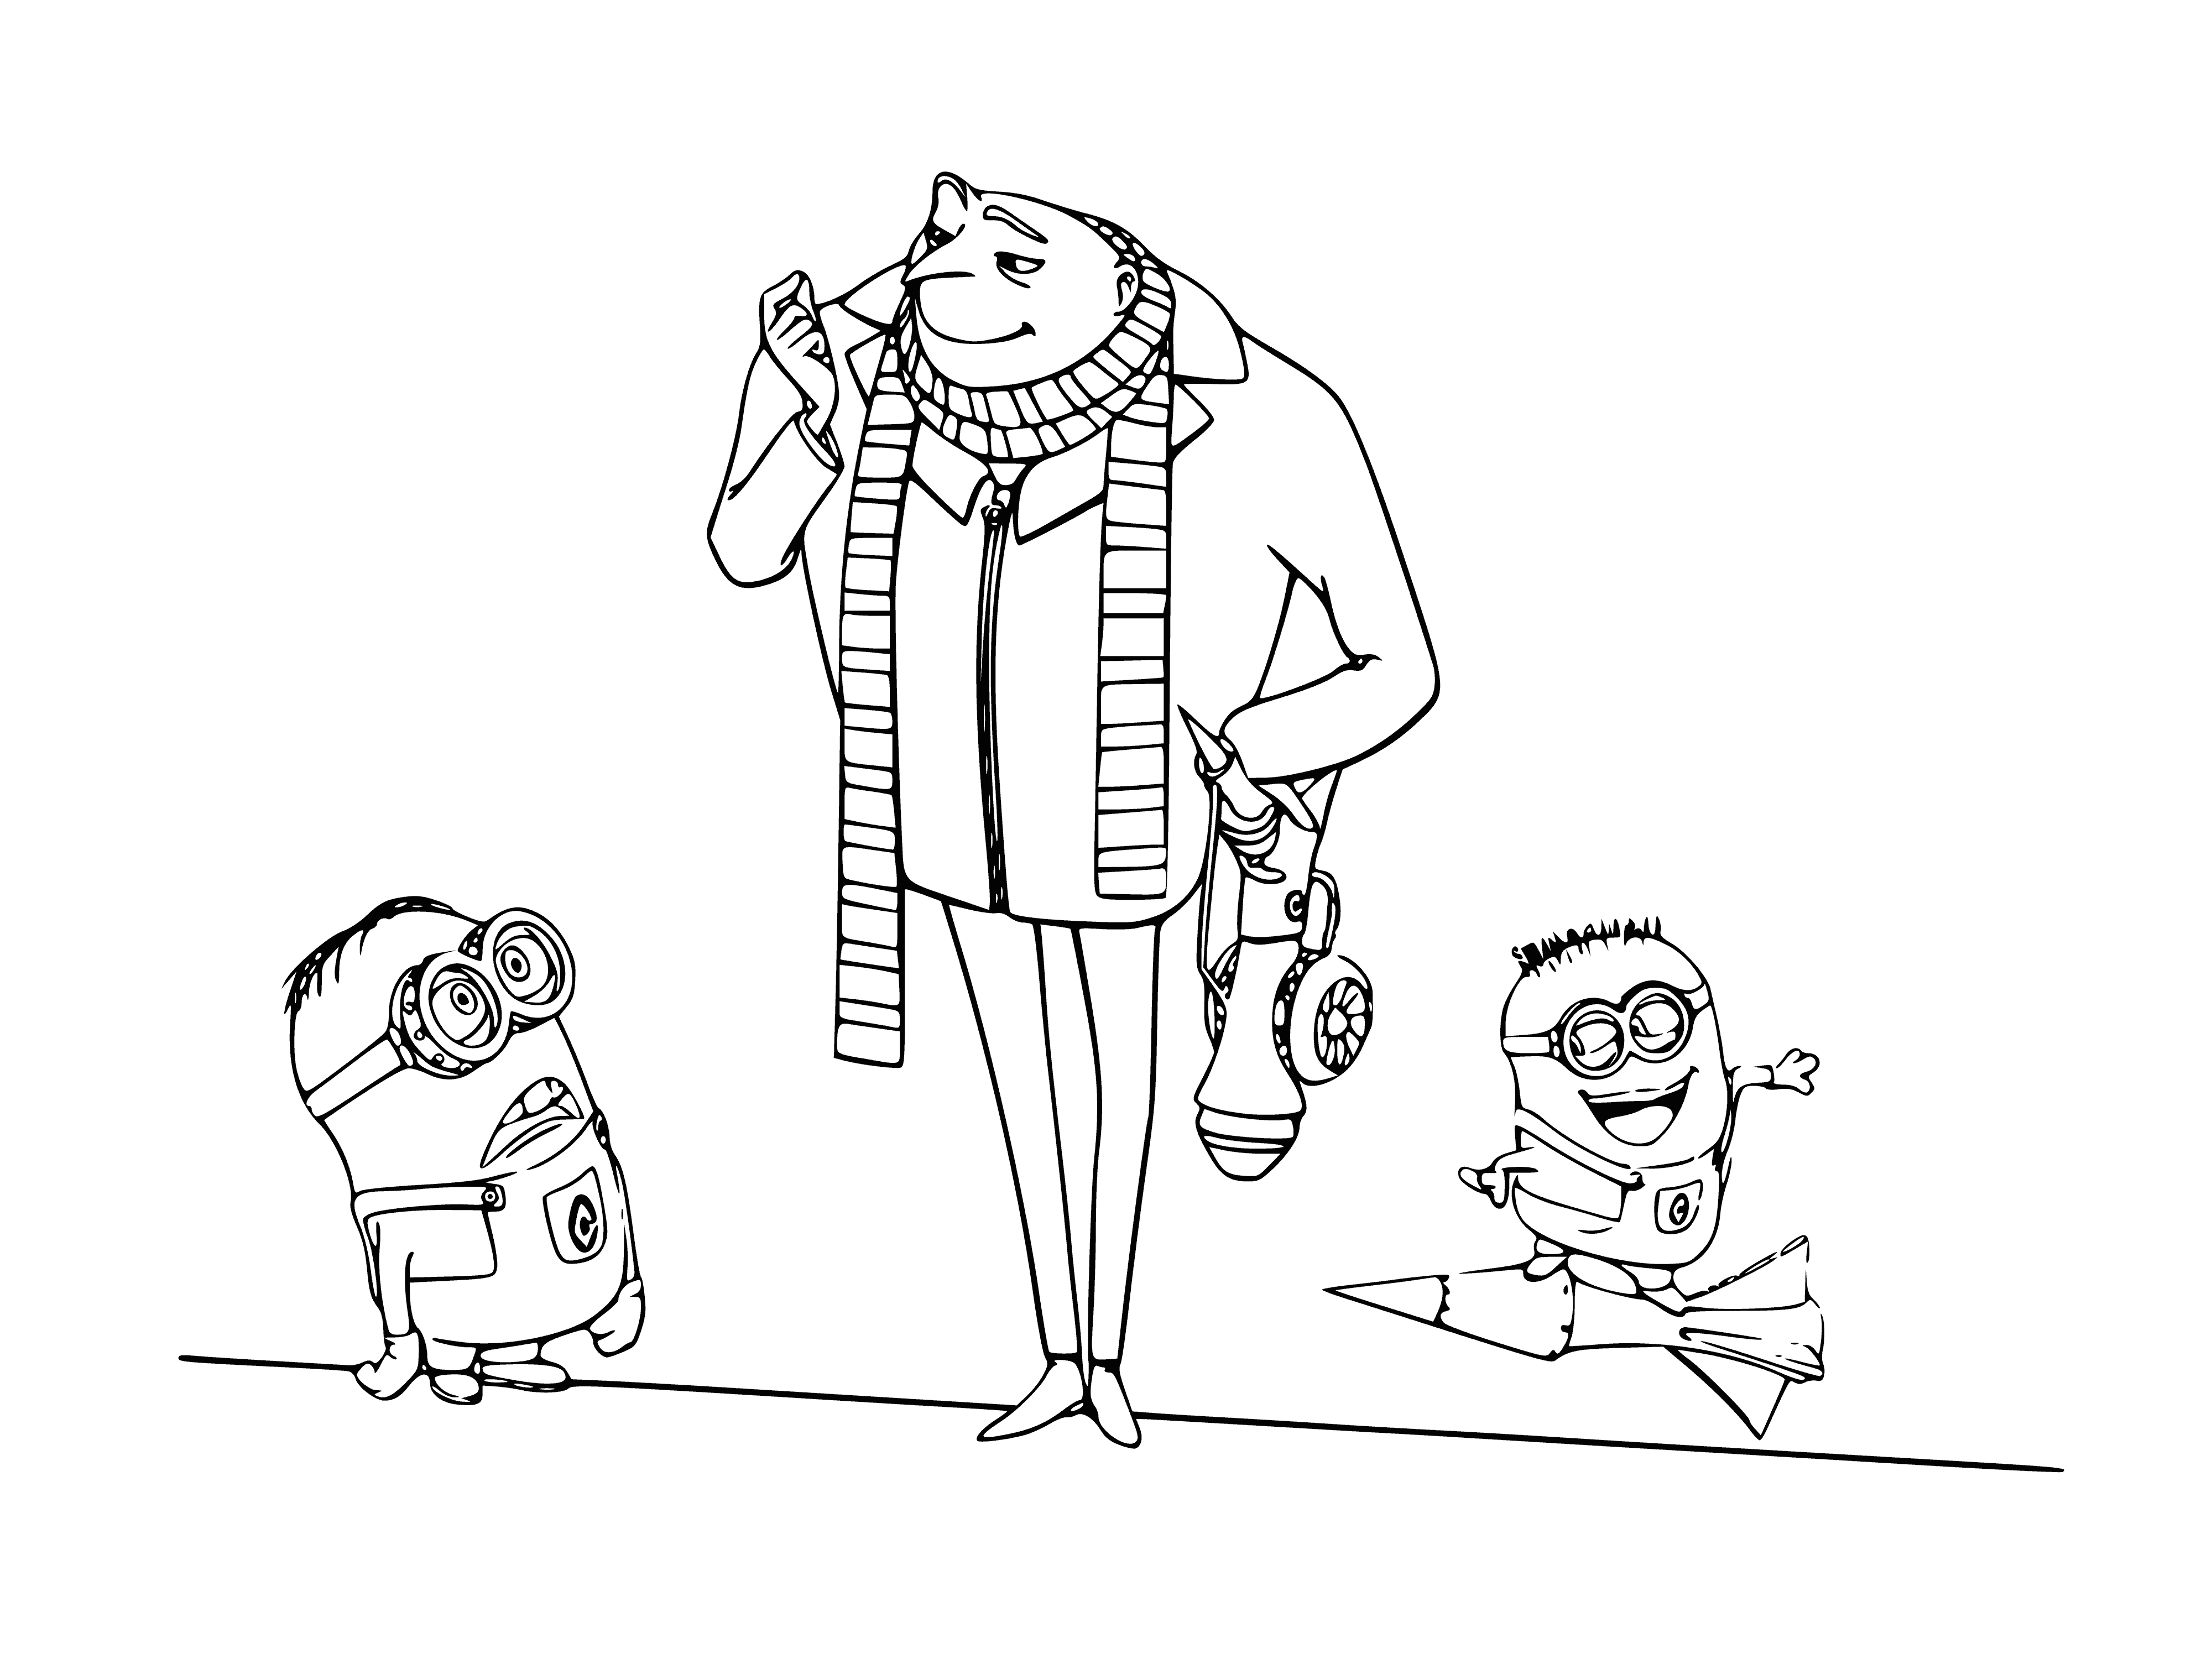 Gru and the minions coloring page